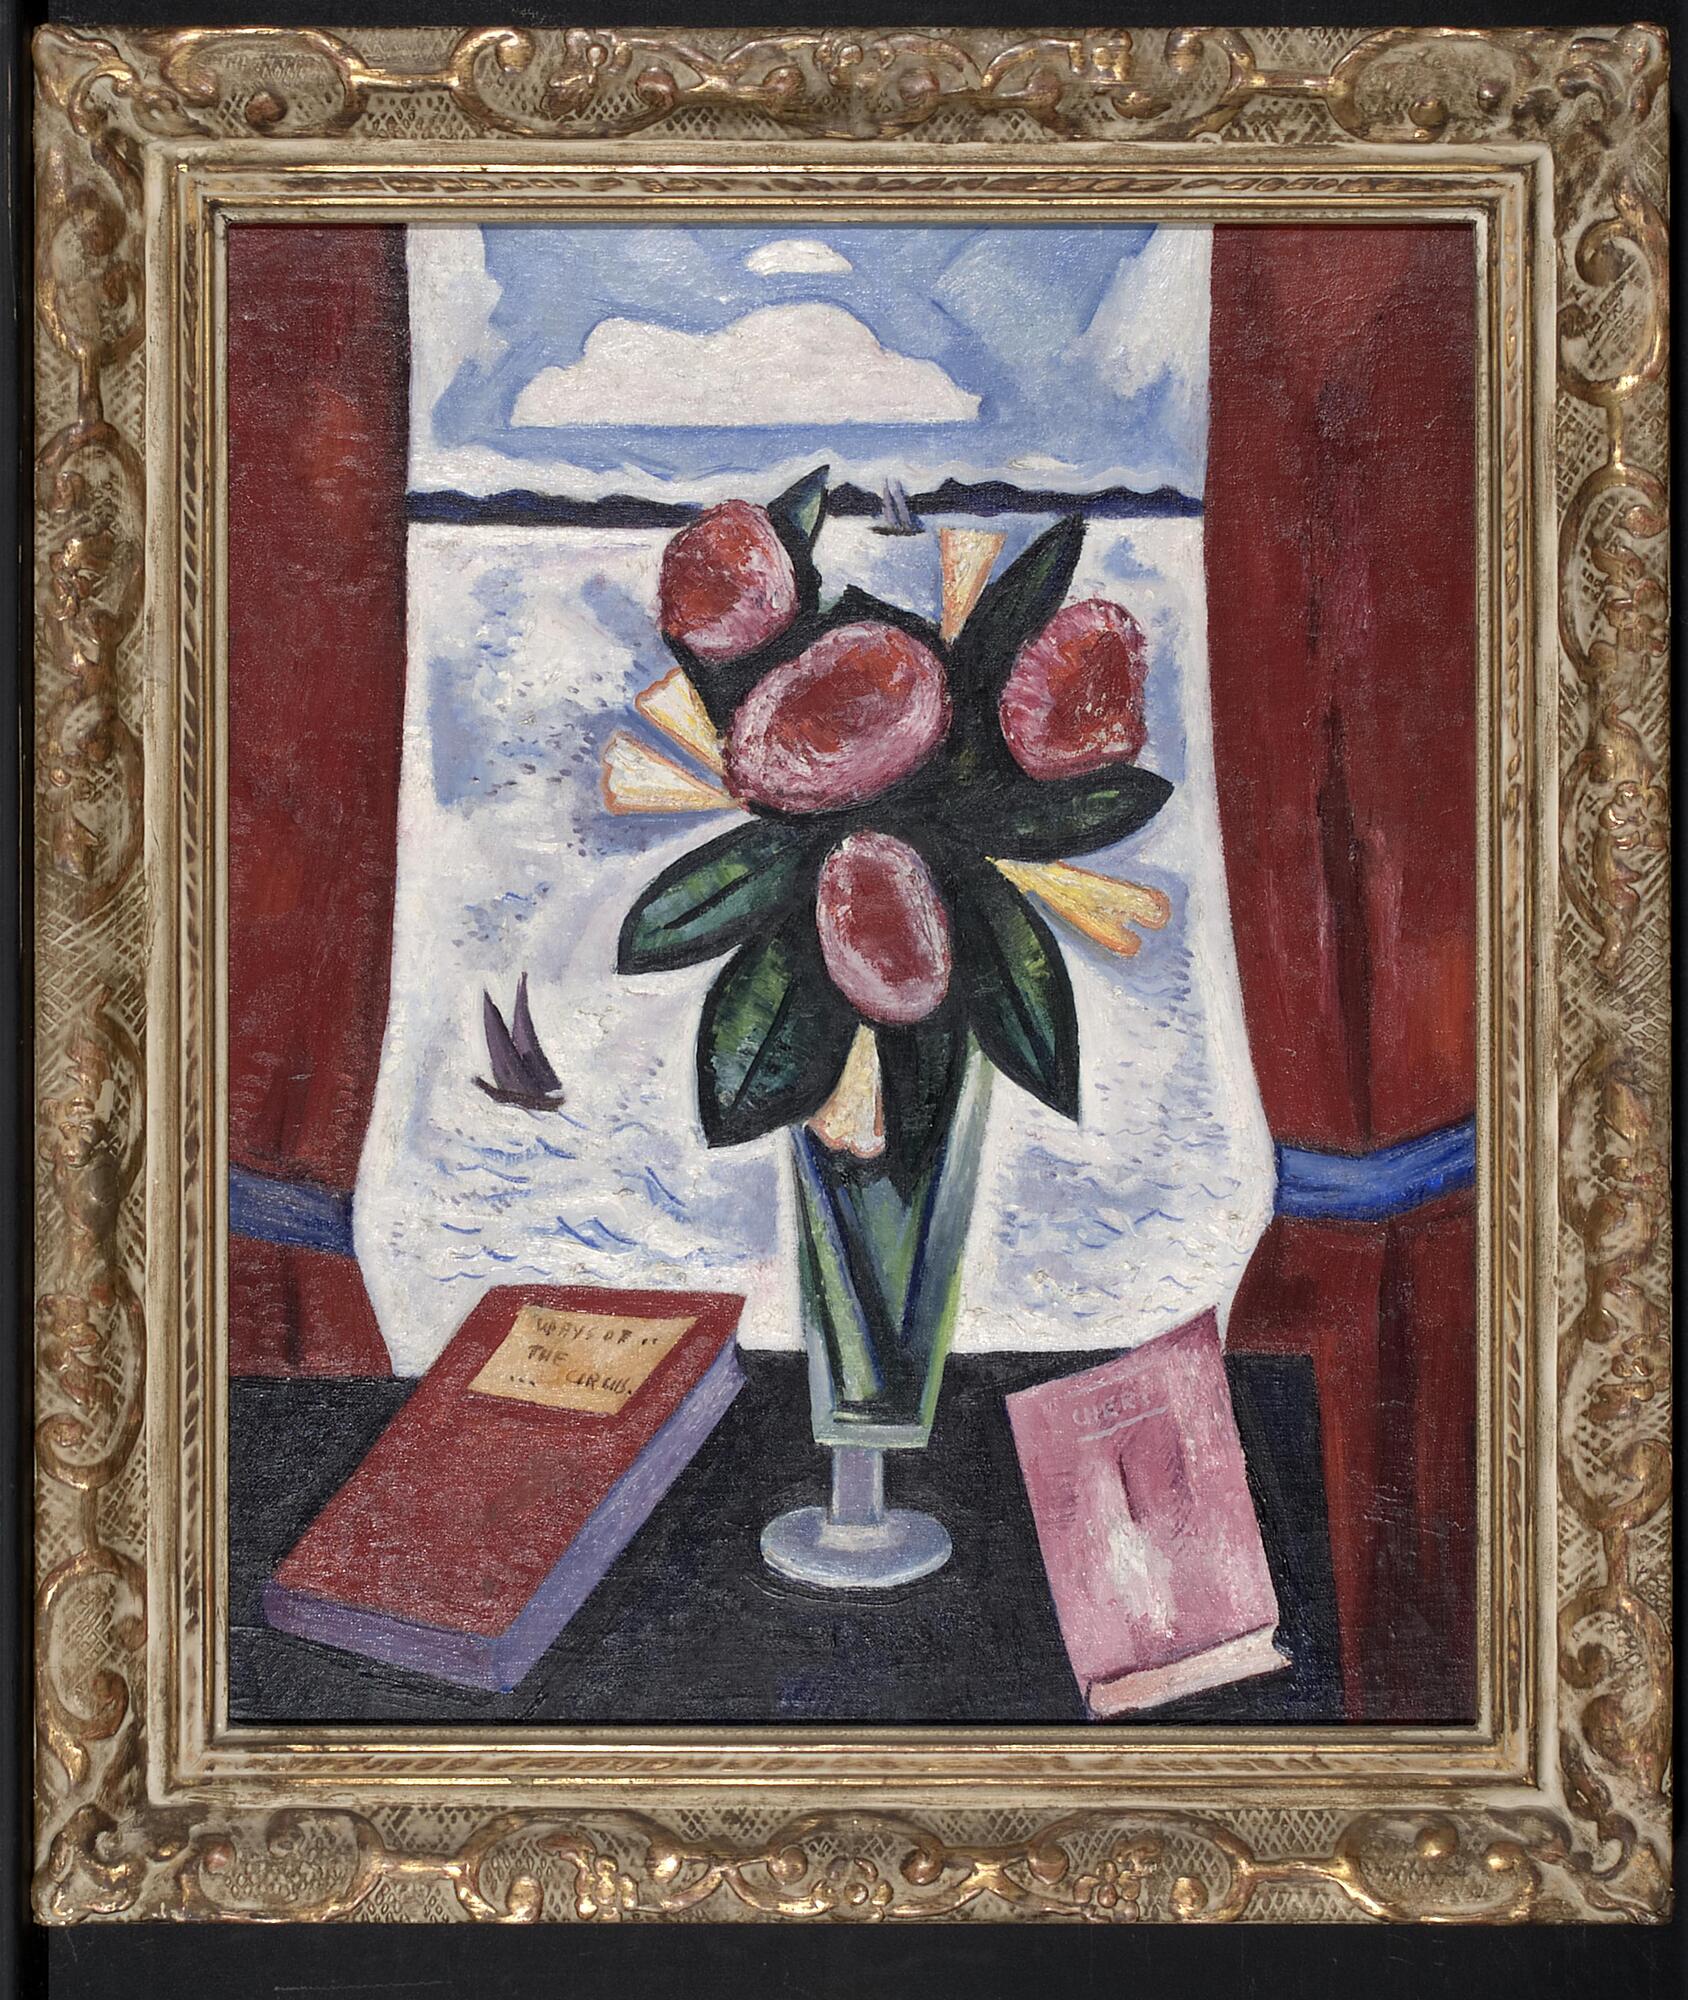 A vase with flowers sits before a window, between two books that lie on a table, and framed by open red curtains. The landscape outside the window shows a blue cloud sky above a body of water.